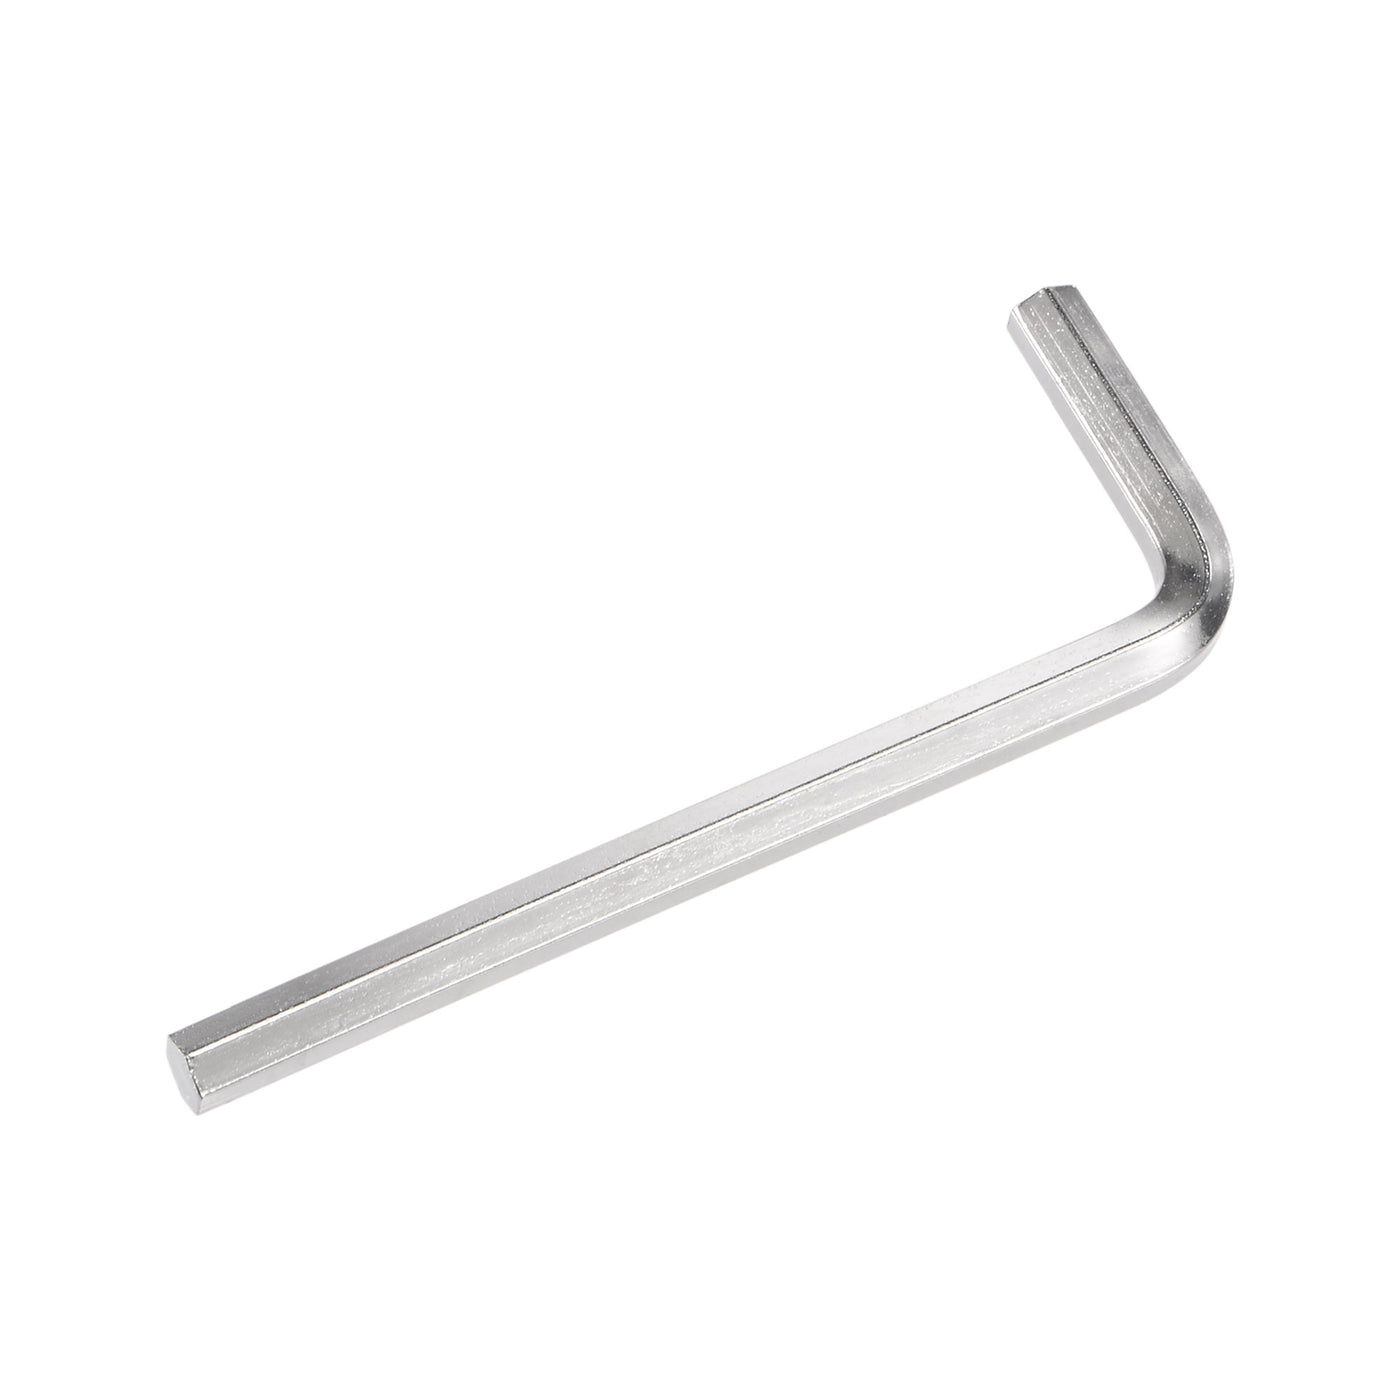 uxcell Uxcell Hex Key Wrench, L Shaped Long Arm CR-V Steel Repairing Tool